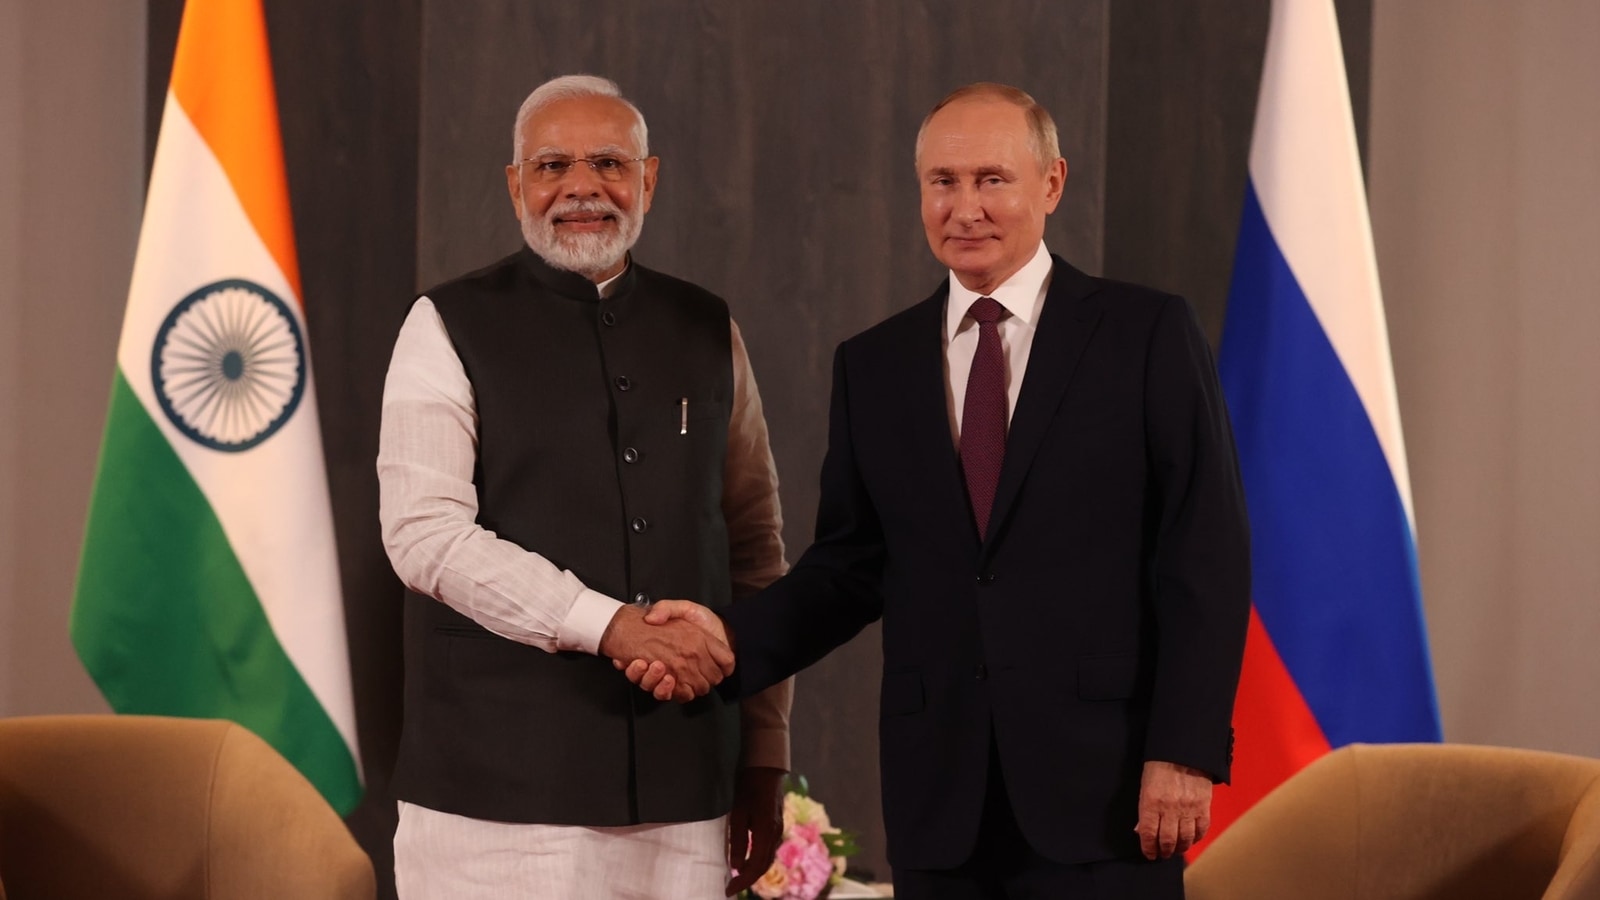 Putin praises PM Modi for independent foreign policy, calls him true  patriot | Latest News India - Hindustan Times